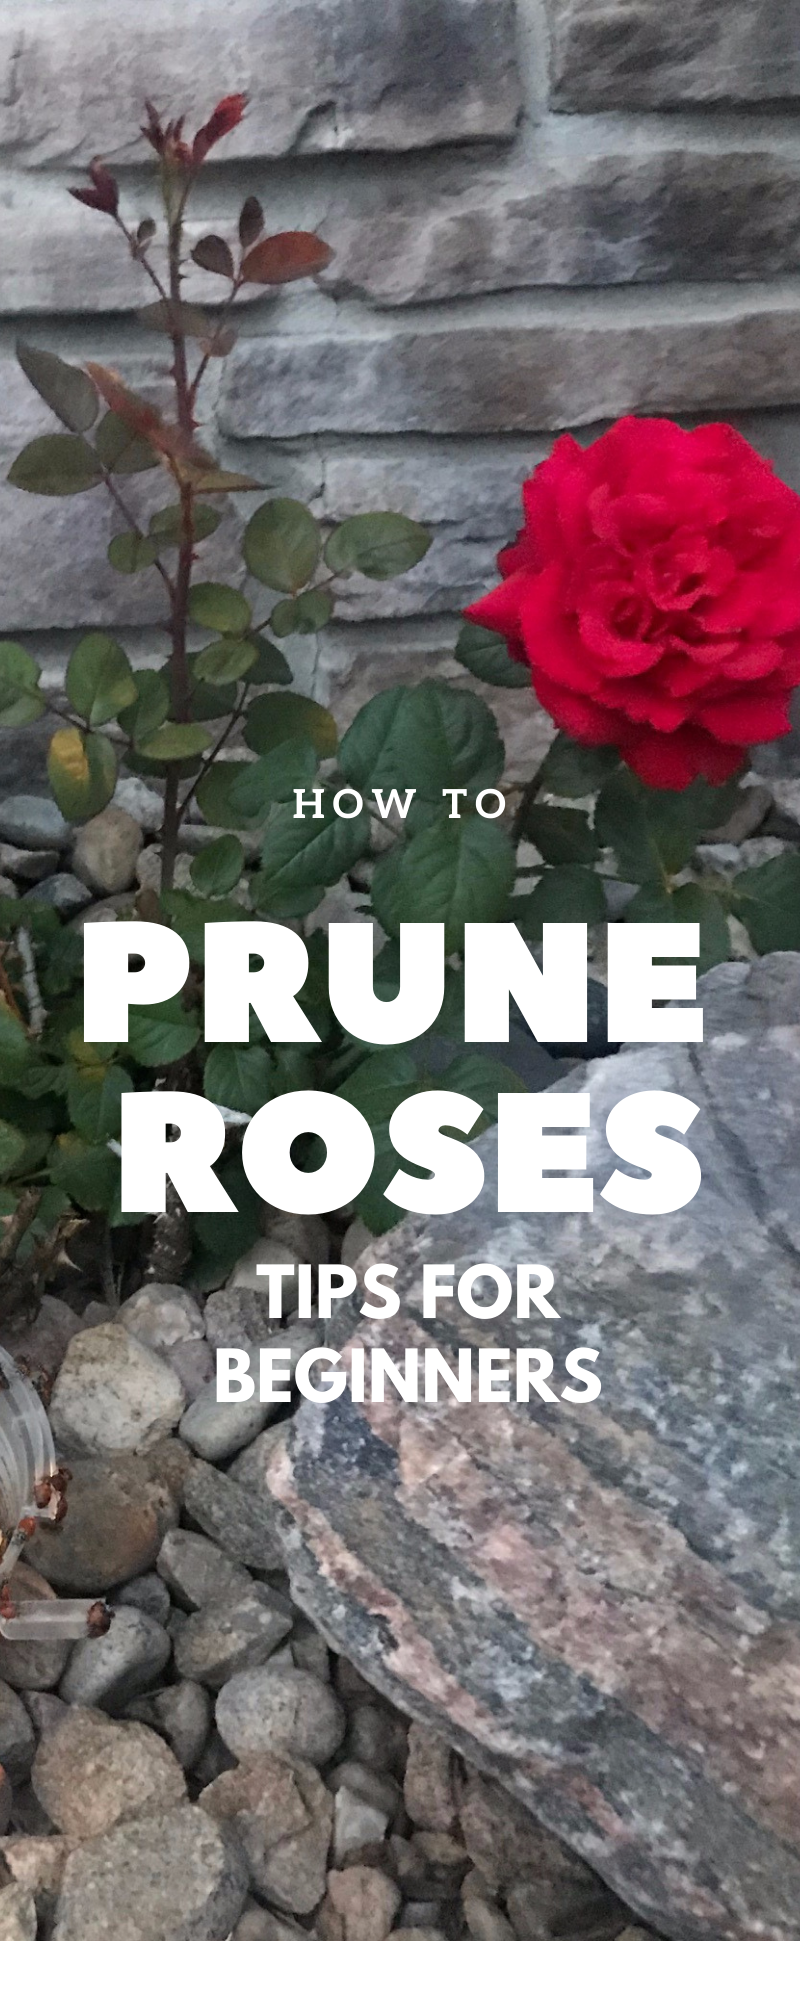 HOW TO PRUNE ROSES TIPS FOR BEGINNERS